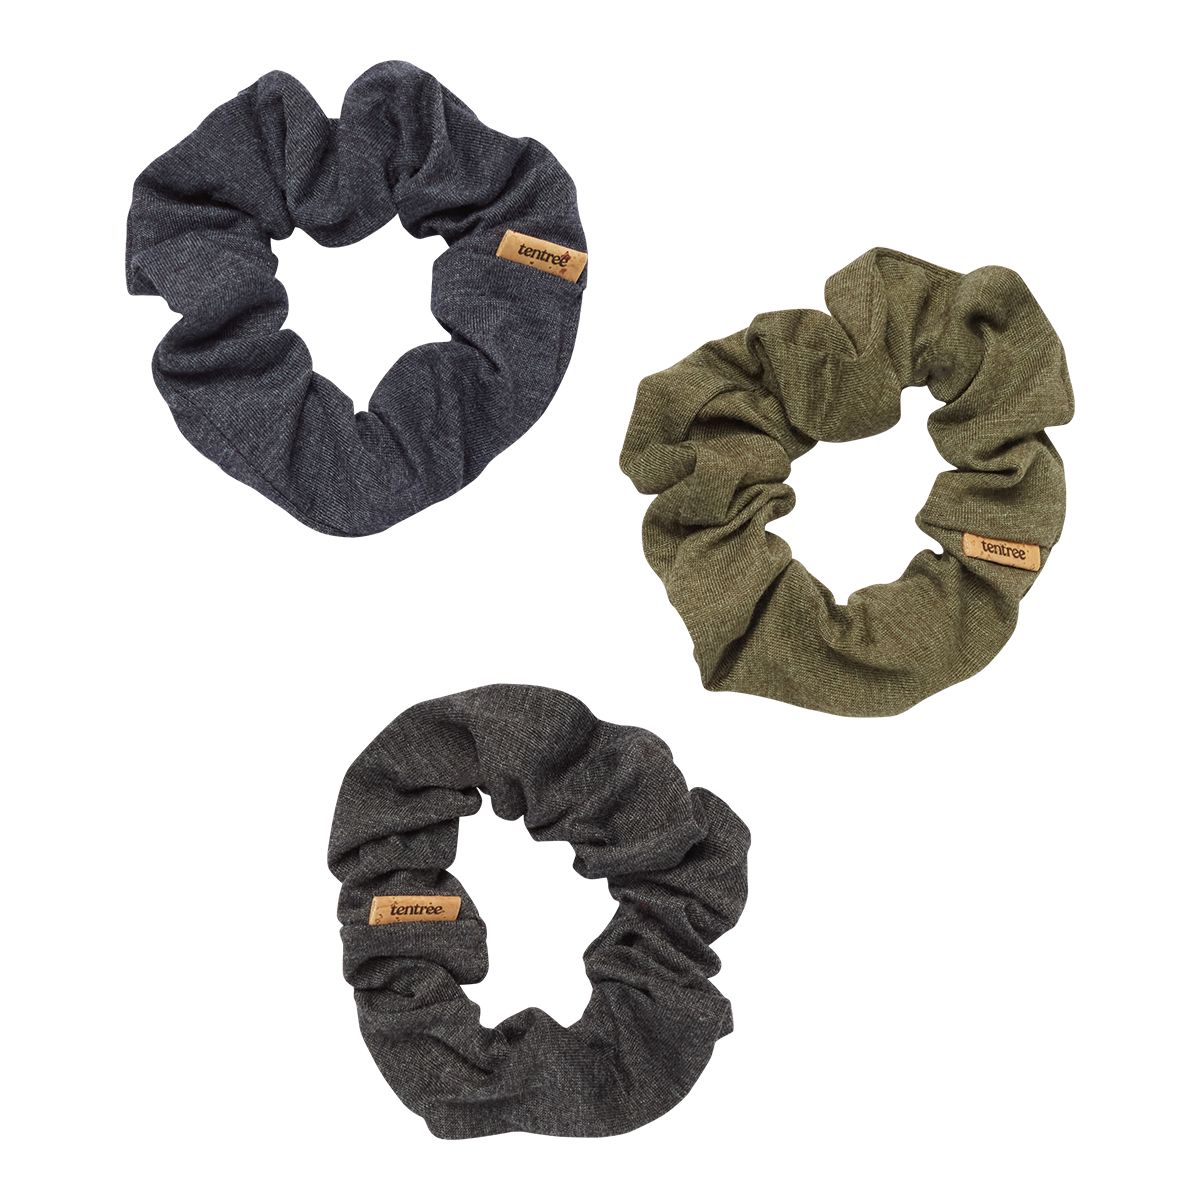 Tentree Men's Upcycled Treeblend Scrunchie - 3 Pack